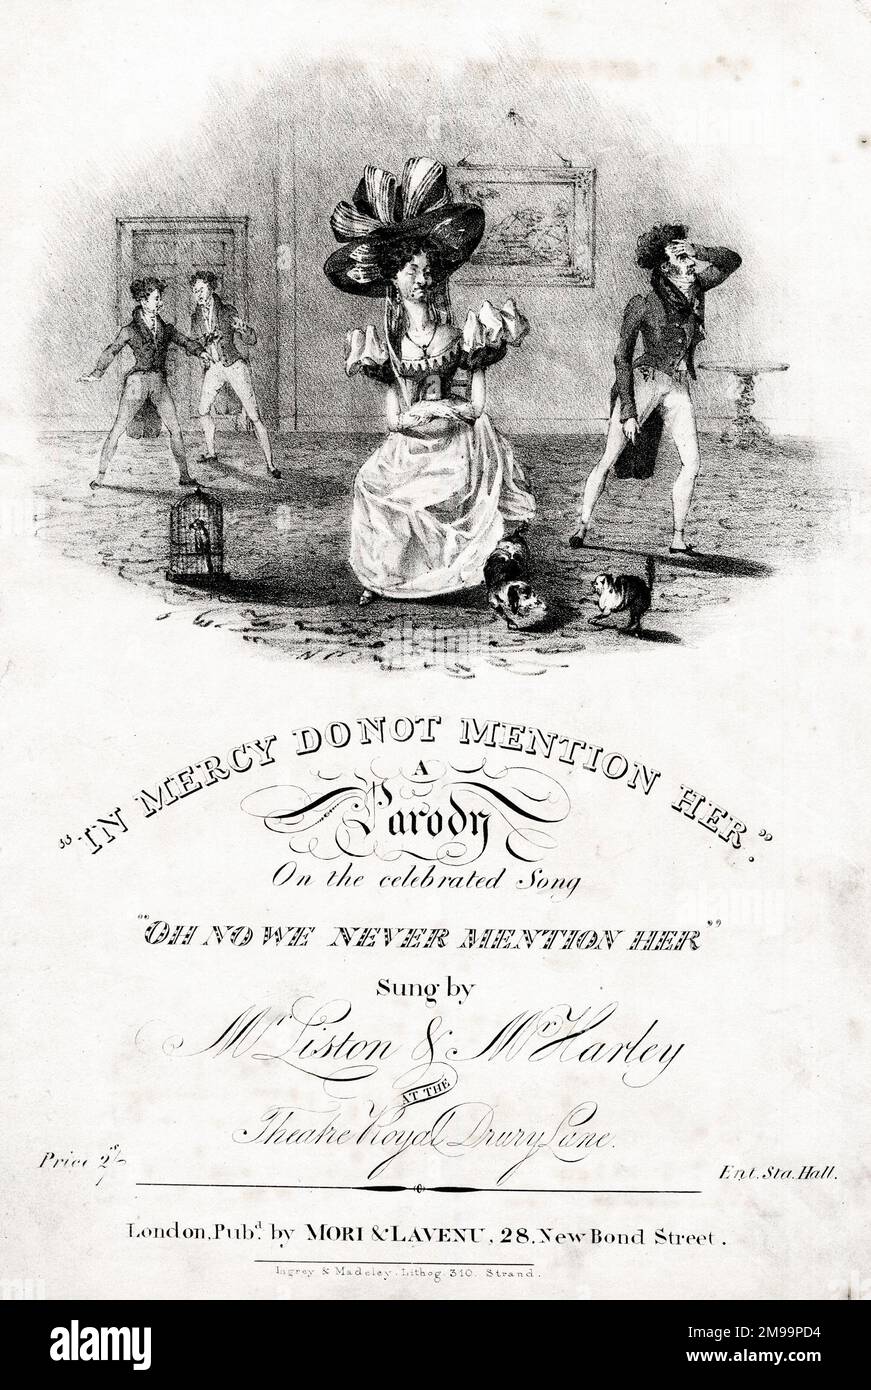 Music cover, In Mercy Do Not Mention Her, a Parody on the celebrated song, Oh No We Never Mention Her, sung by Mr Liston and Mr Harley, at the Theatre Royal, Drury Lane, London. Stock Photo